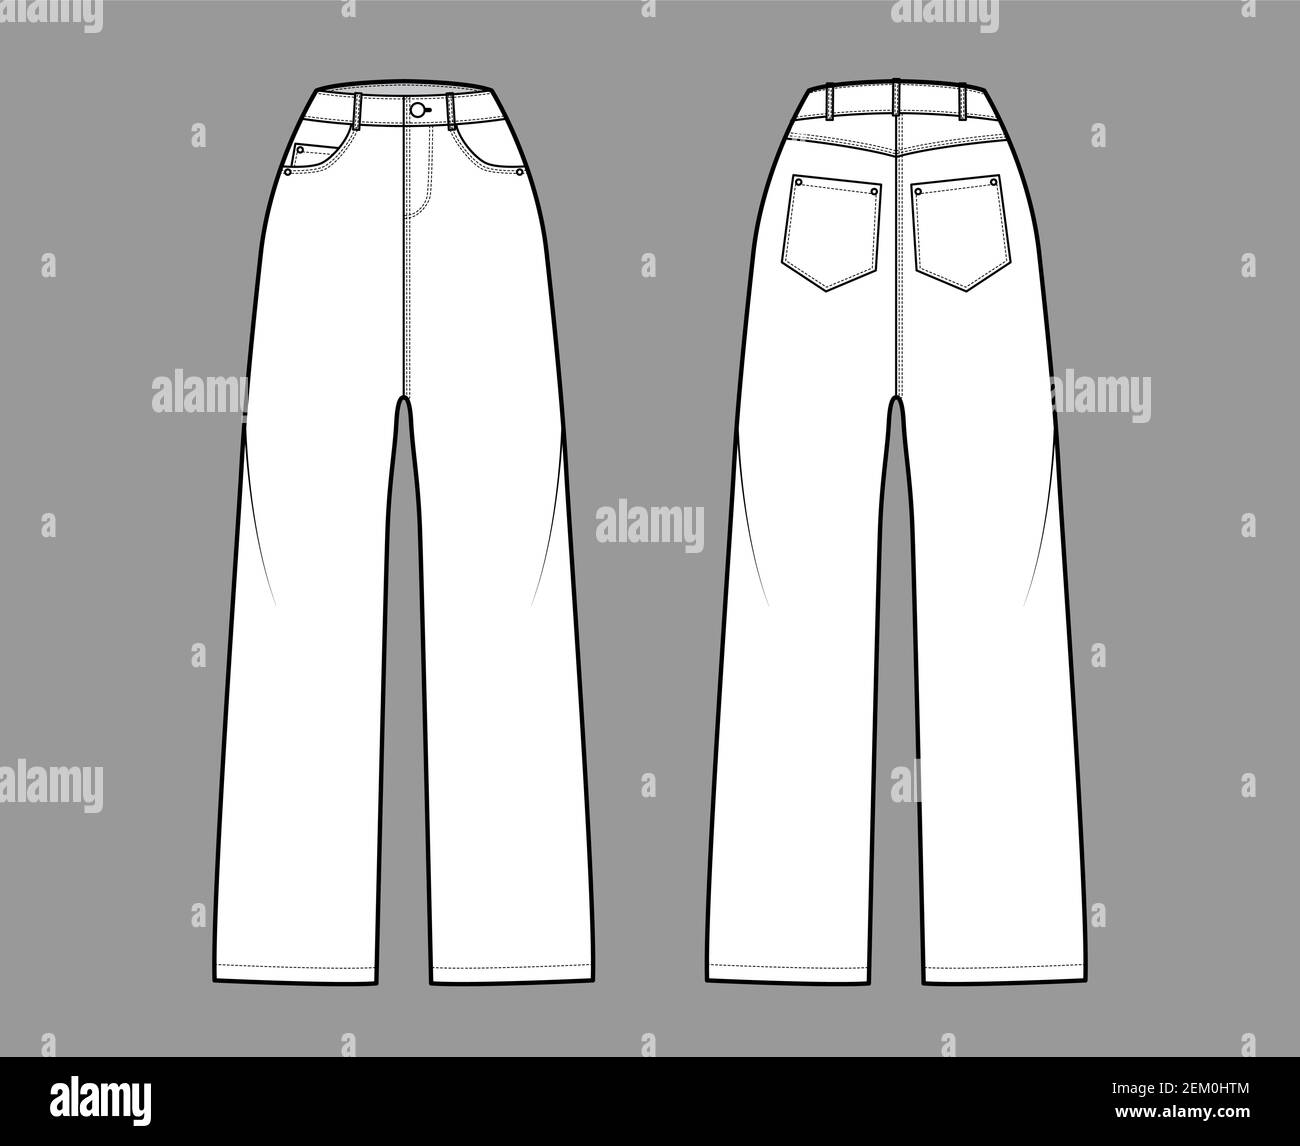 Baggy Jeans Denim pants technical fashion illustration with full length,  normal waist, high rise, 5 pockets,